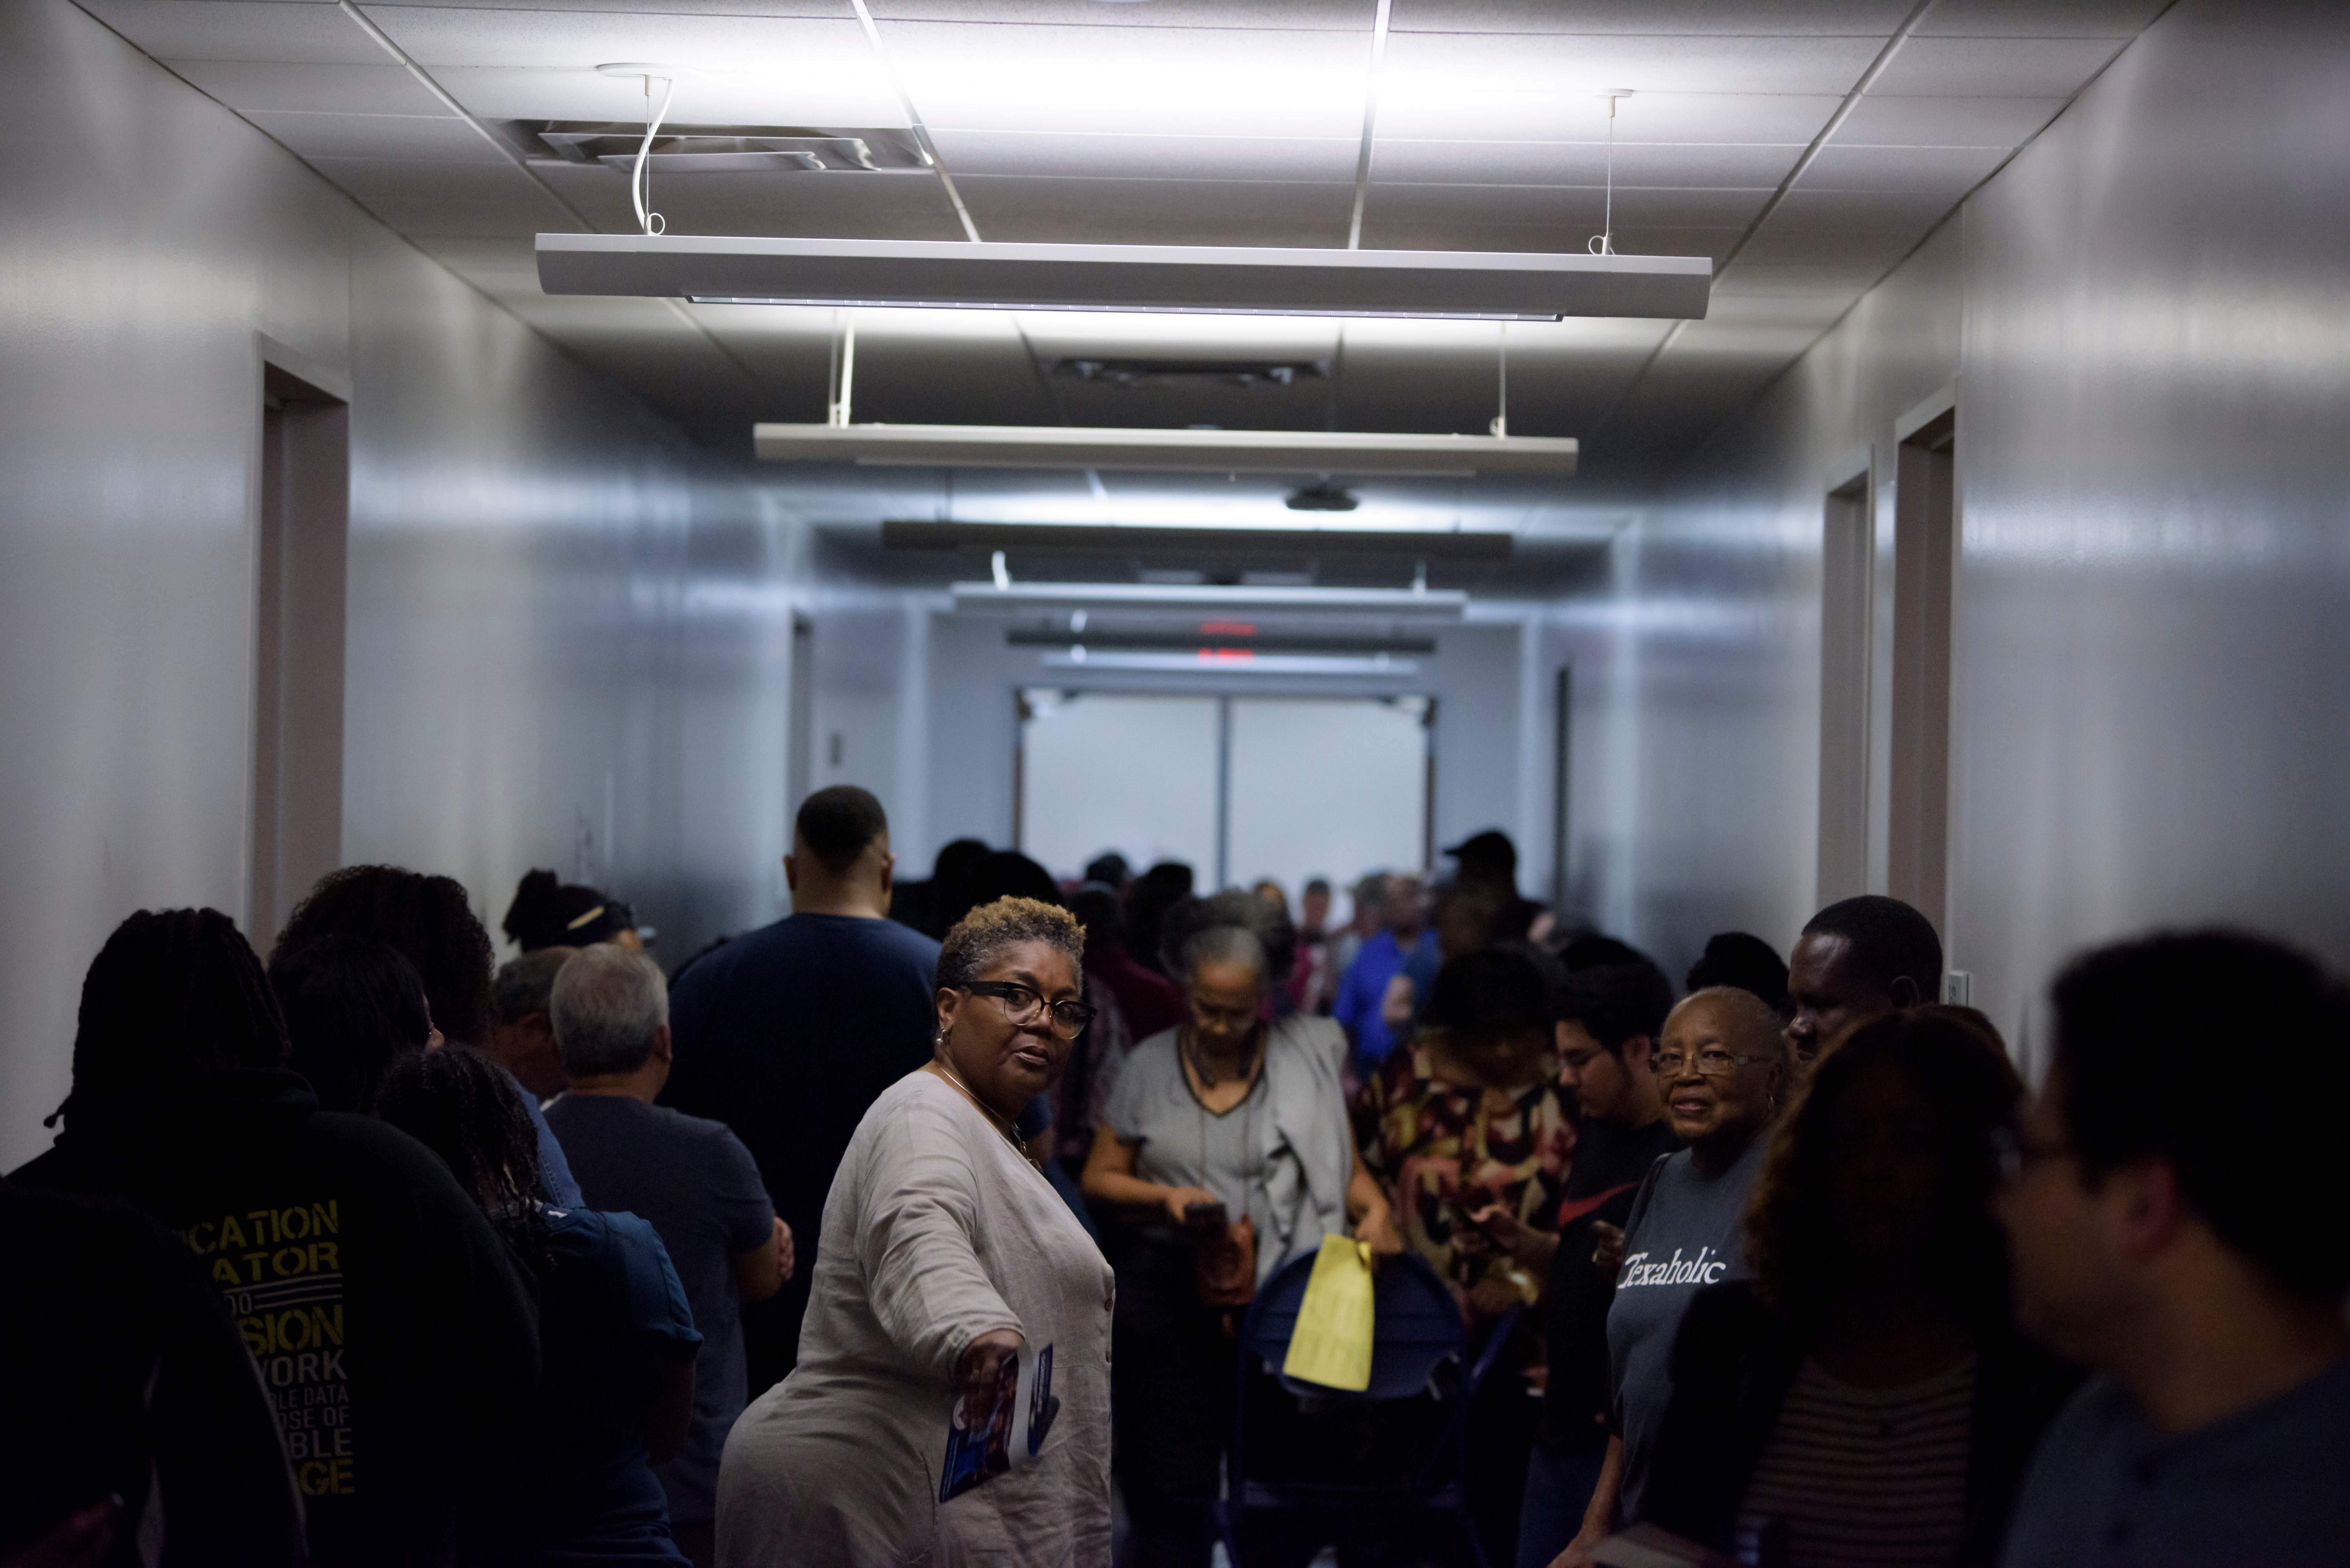 In this image, a crowd of people stand in a hallway to vote